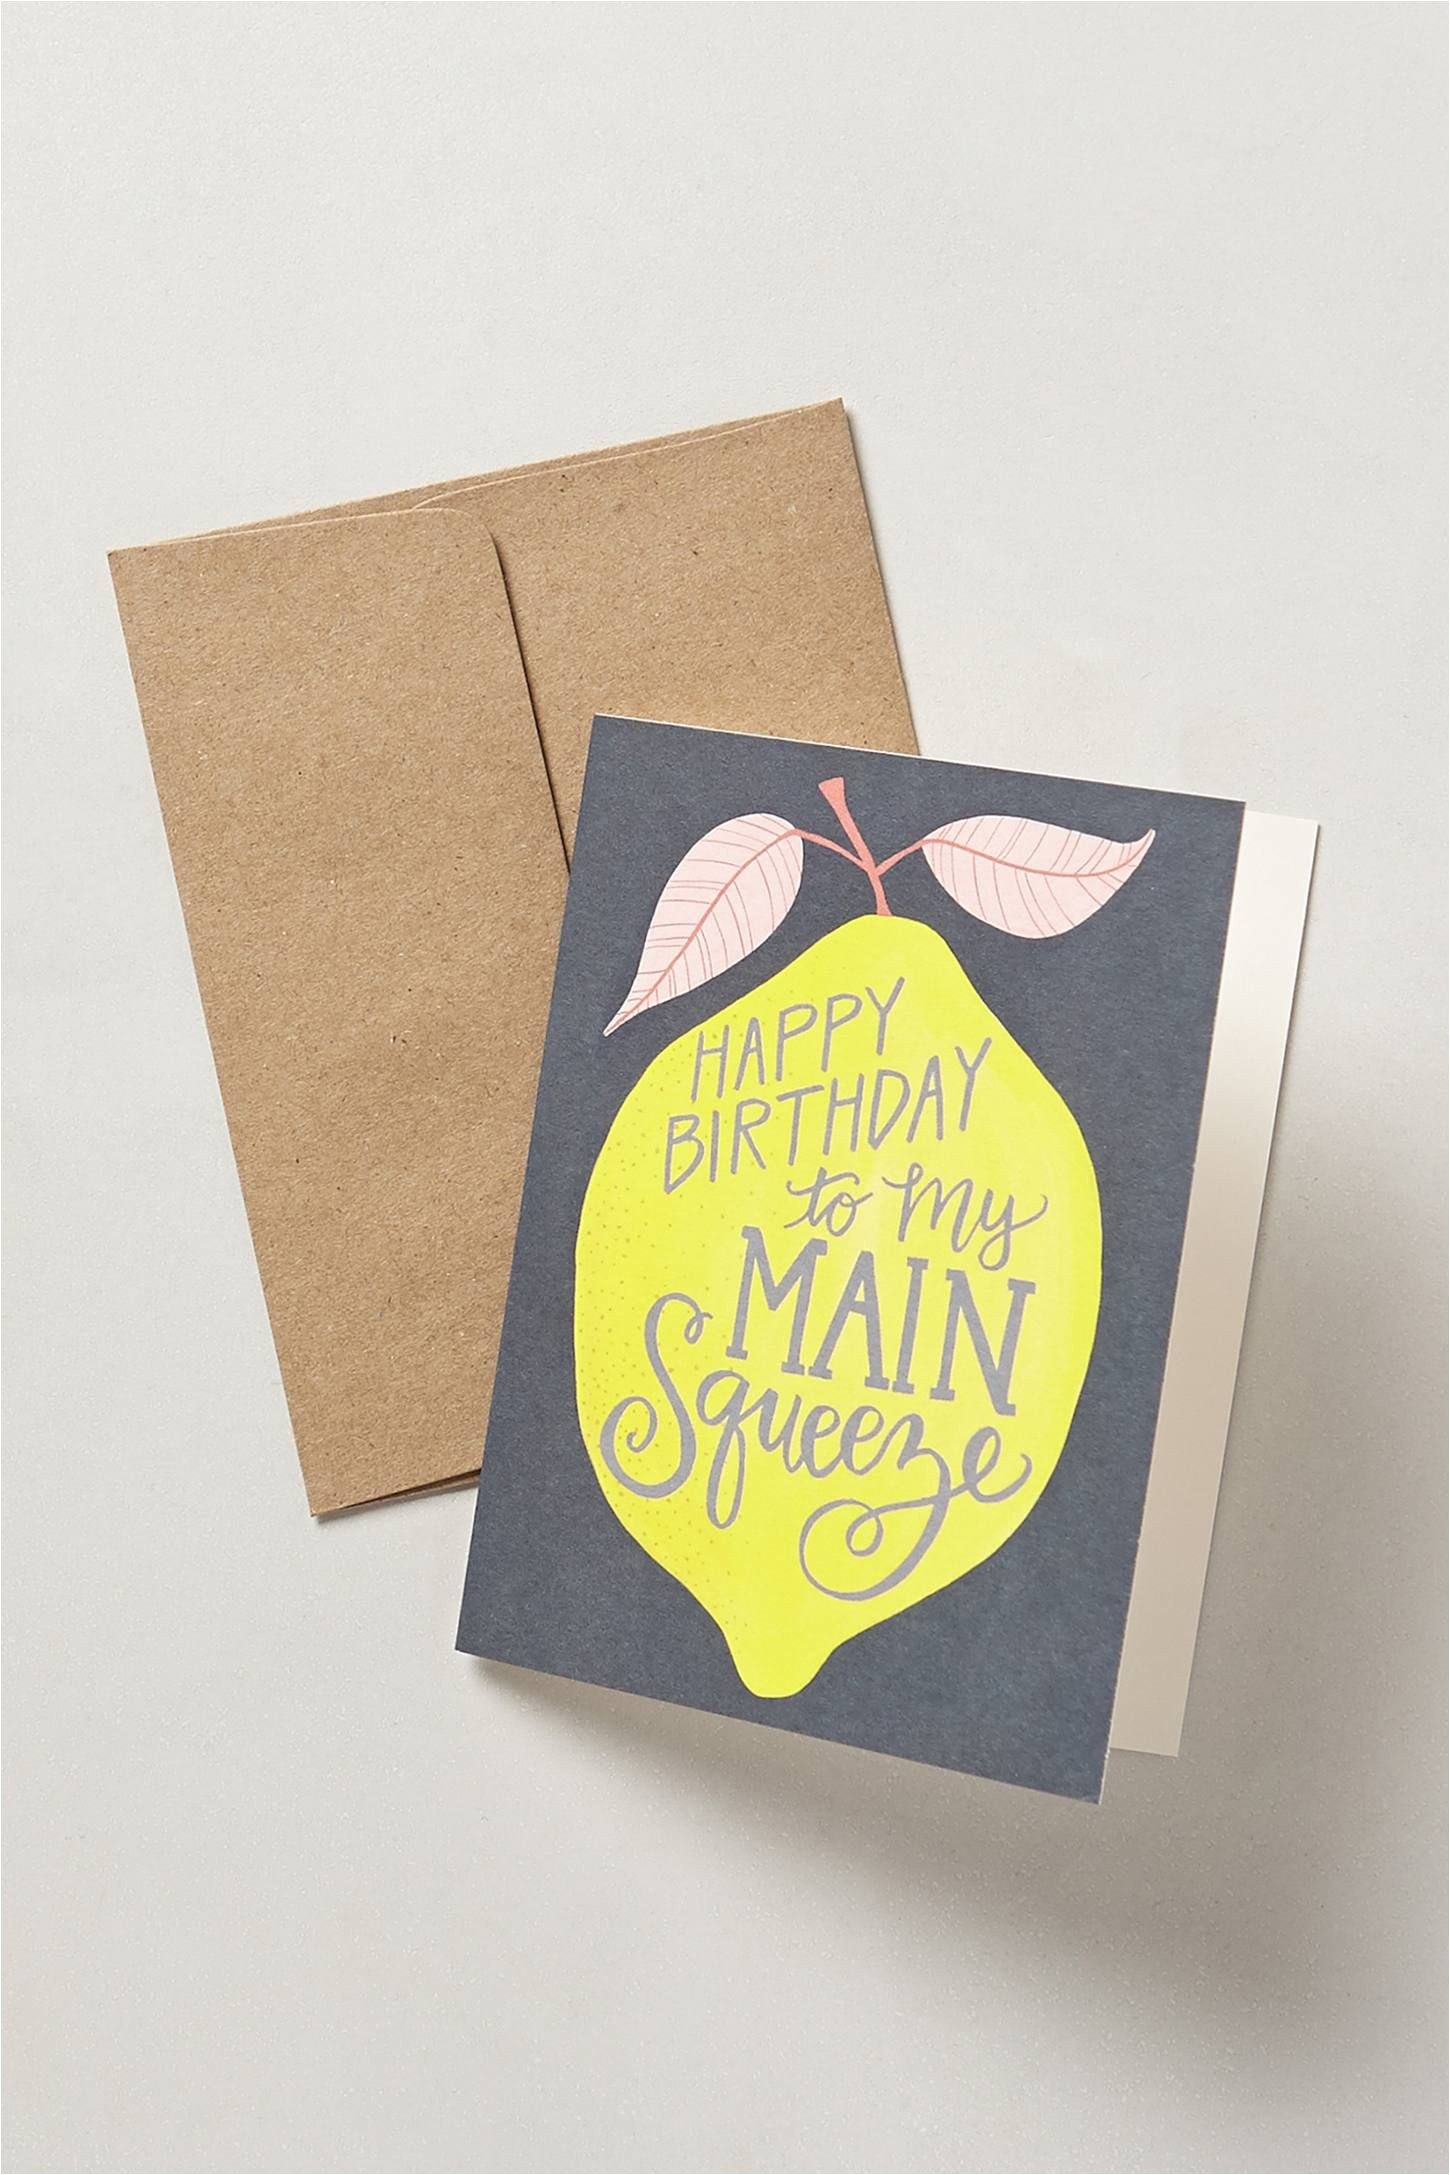 Happy Birthday Card Ideas for Dad 10 Bright Colorful Birthday Cards to Send This Month